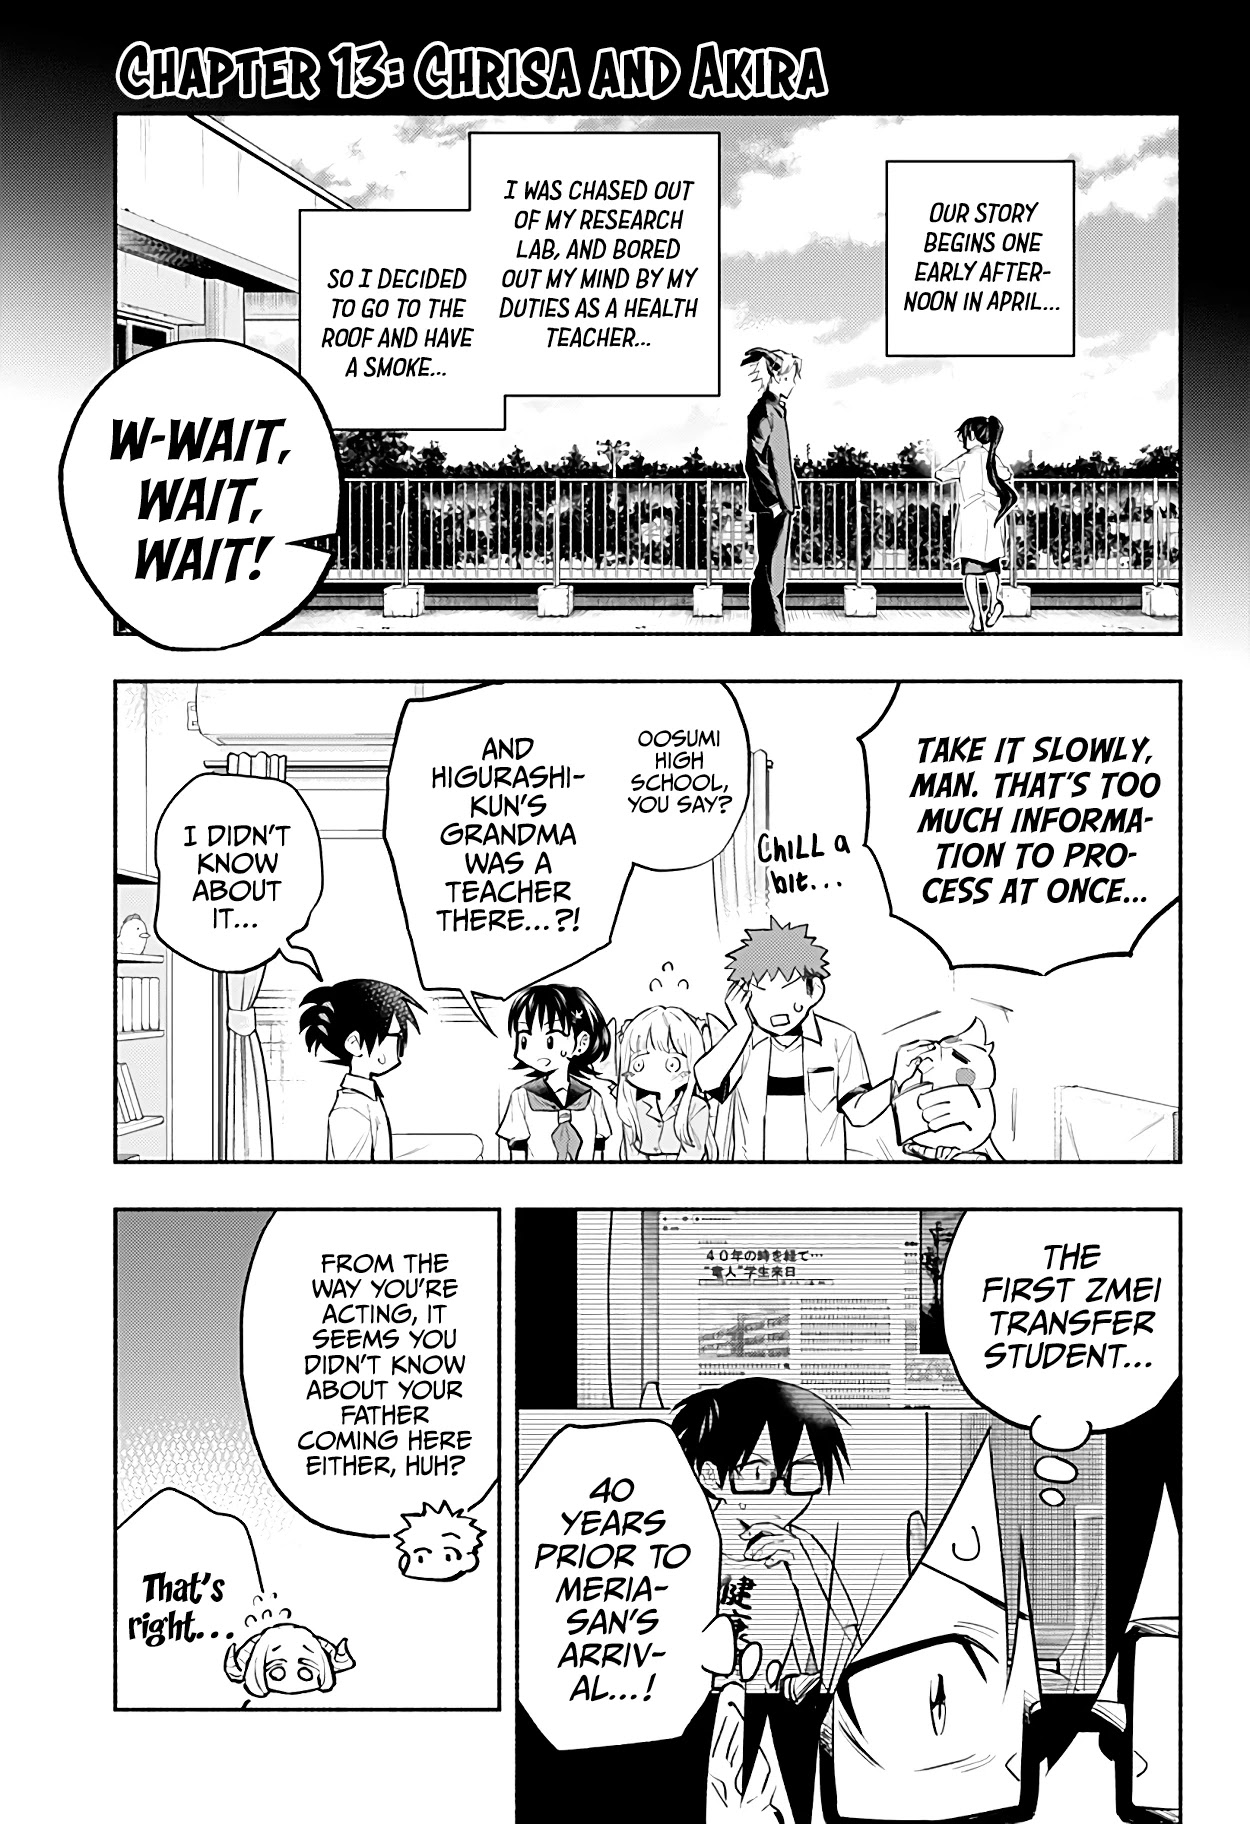 That Dragon (Exchange) Student Stands Out More Than Me Chapter 13 #4